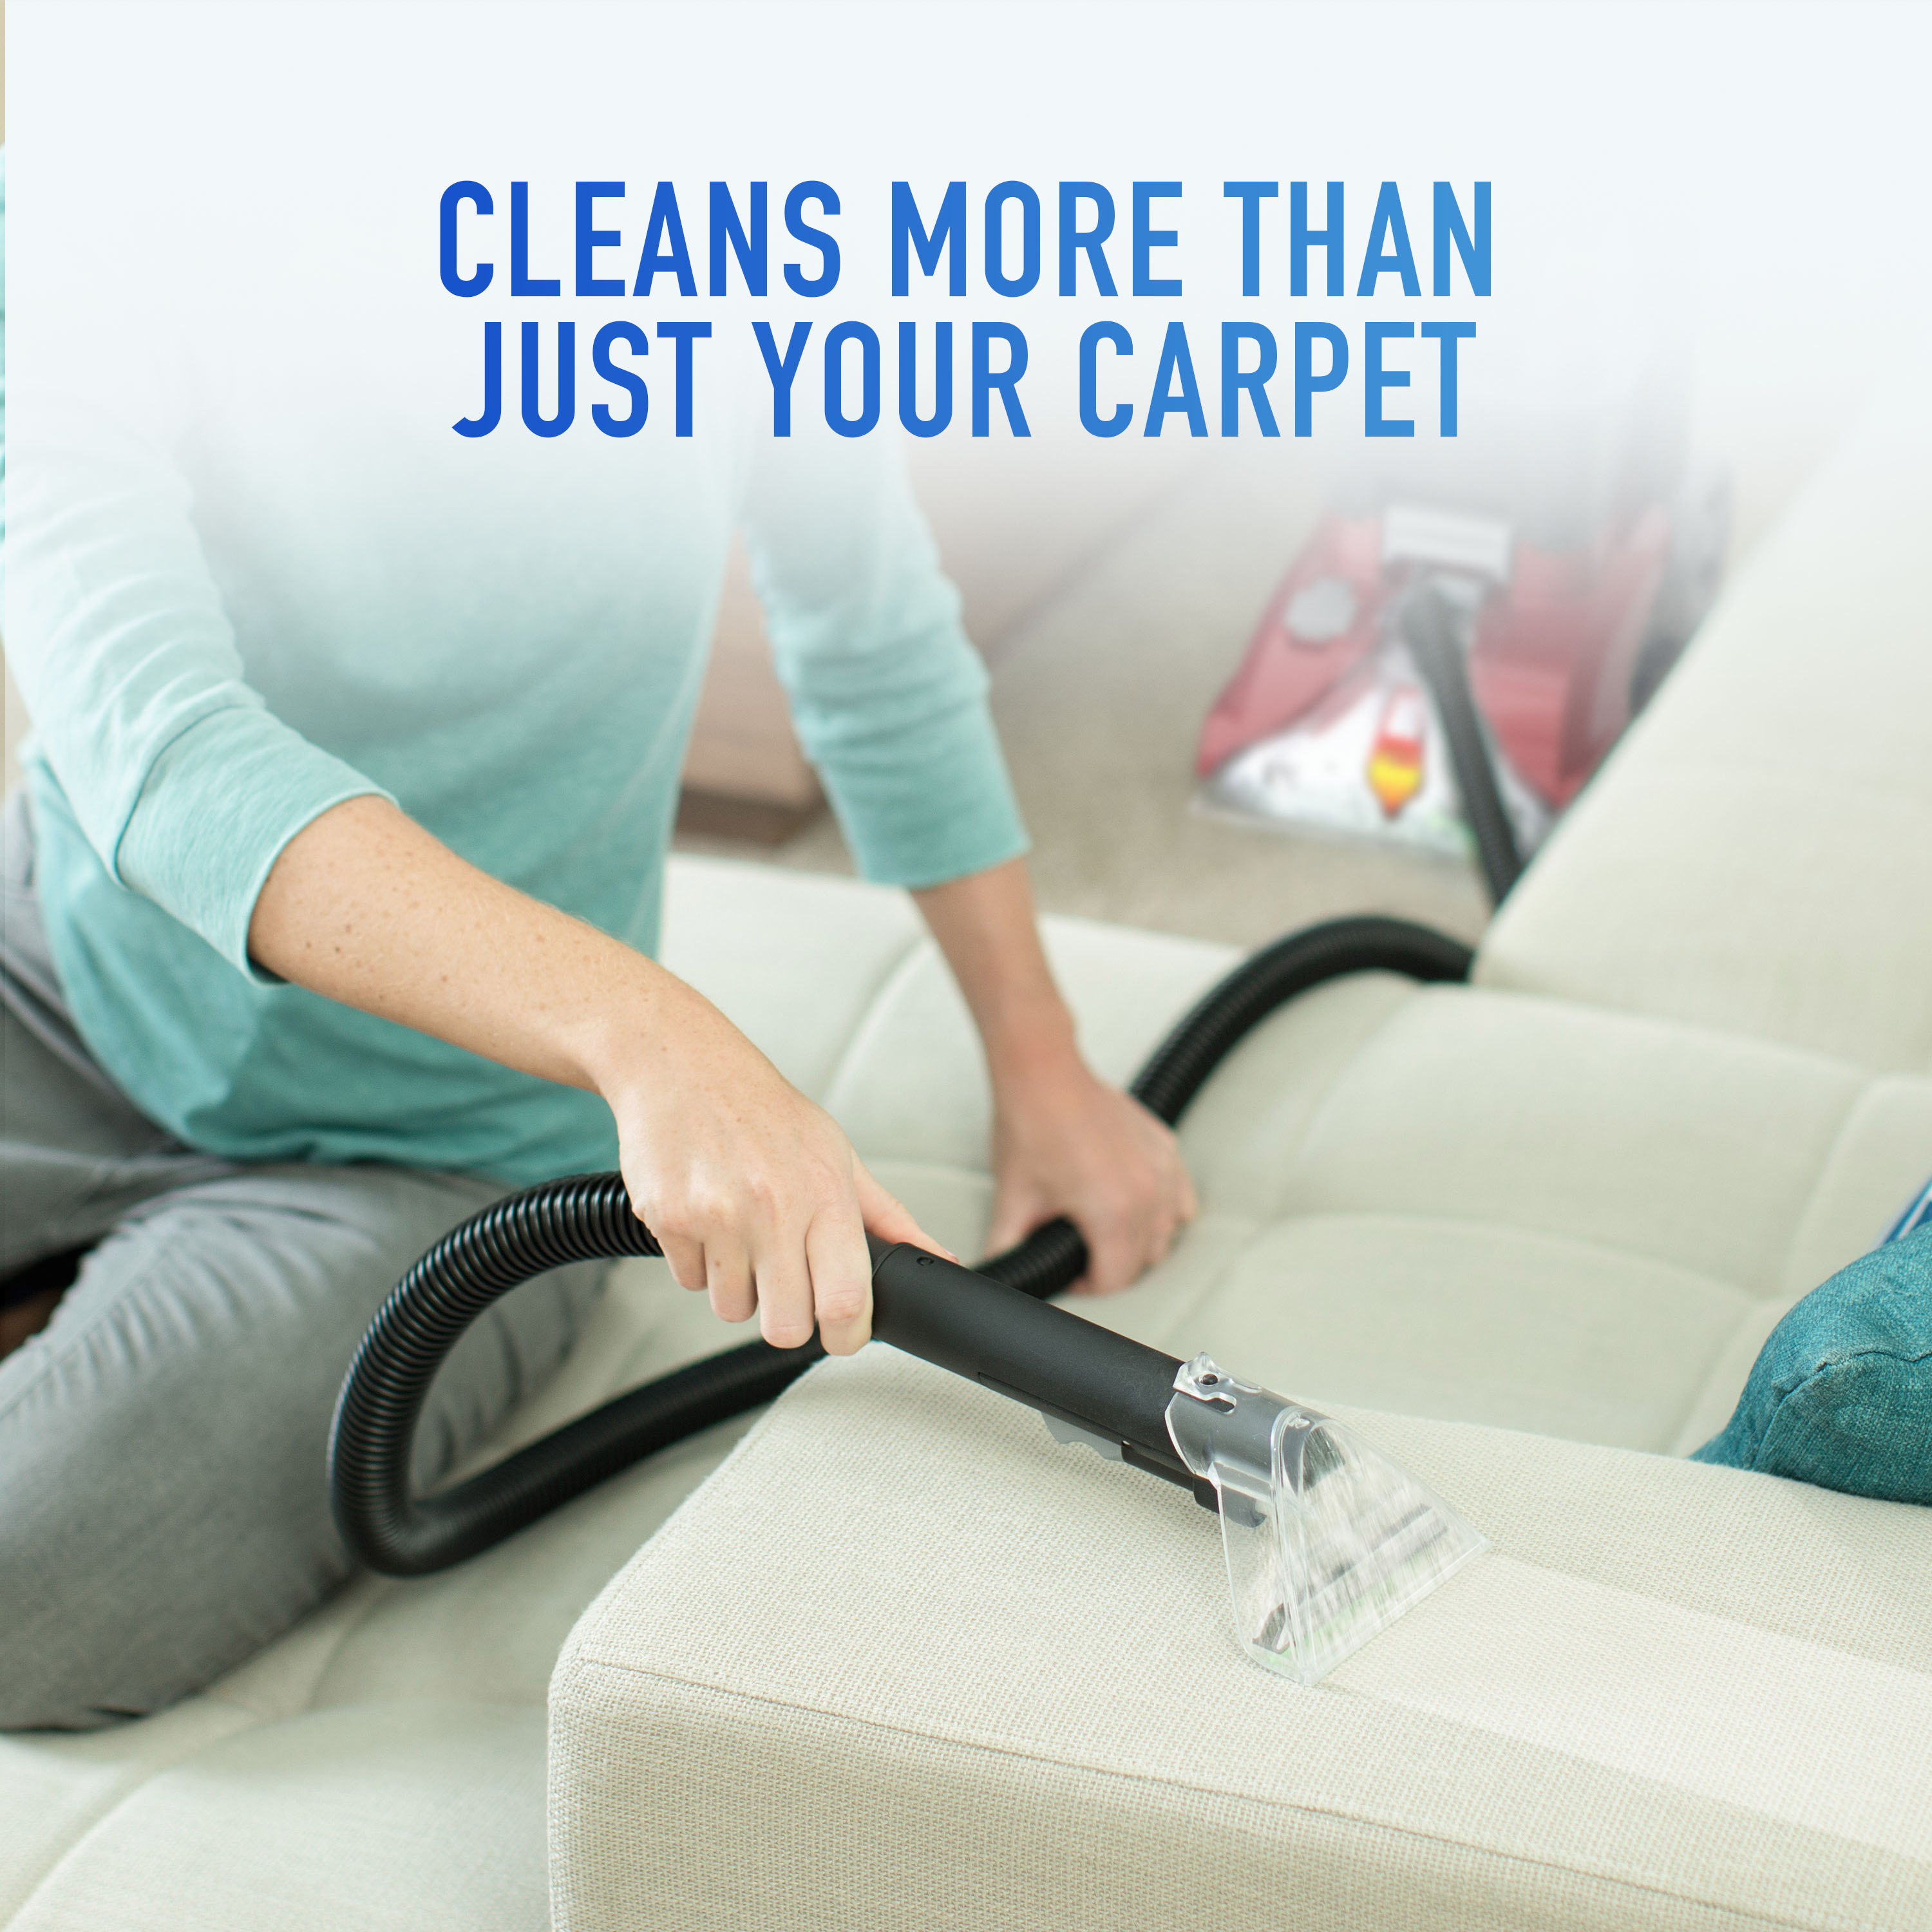 Hoover PowerScrub Carpet Cleaner with SpinScrub Technology, FH50135 - image 5 of 14